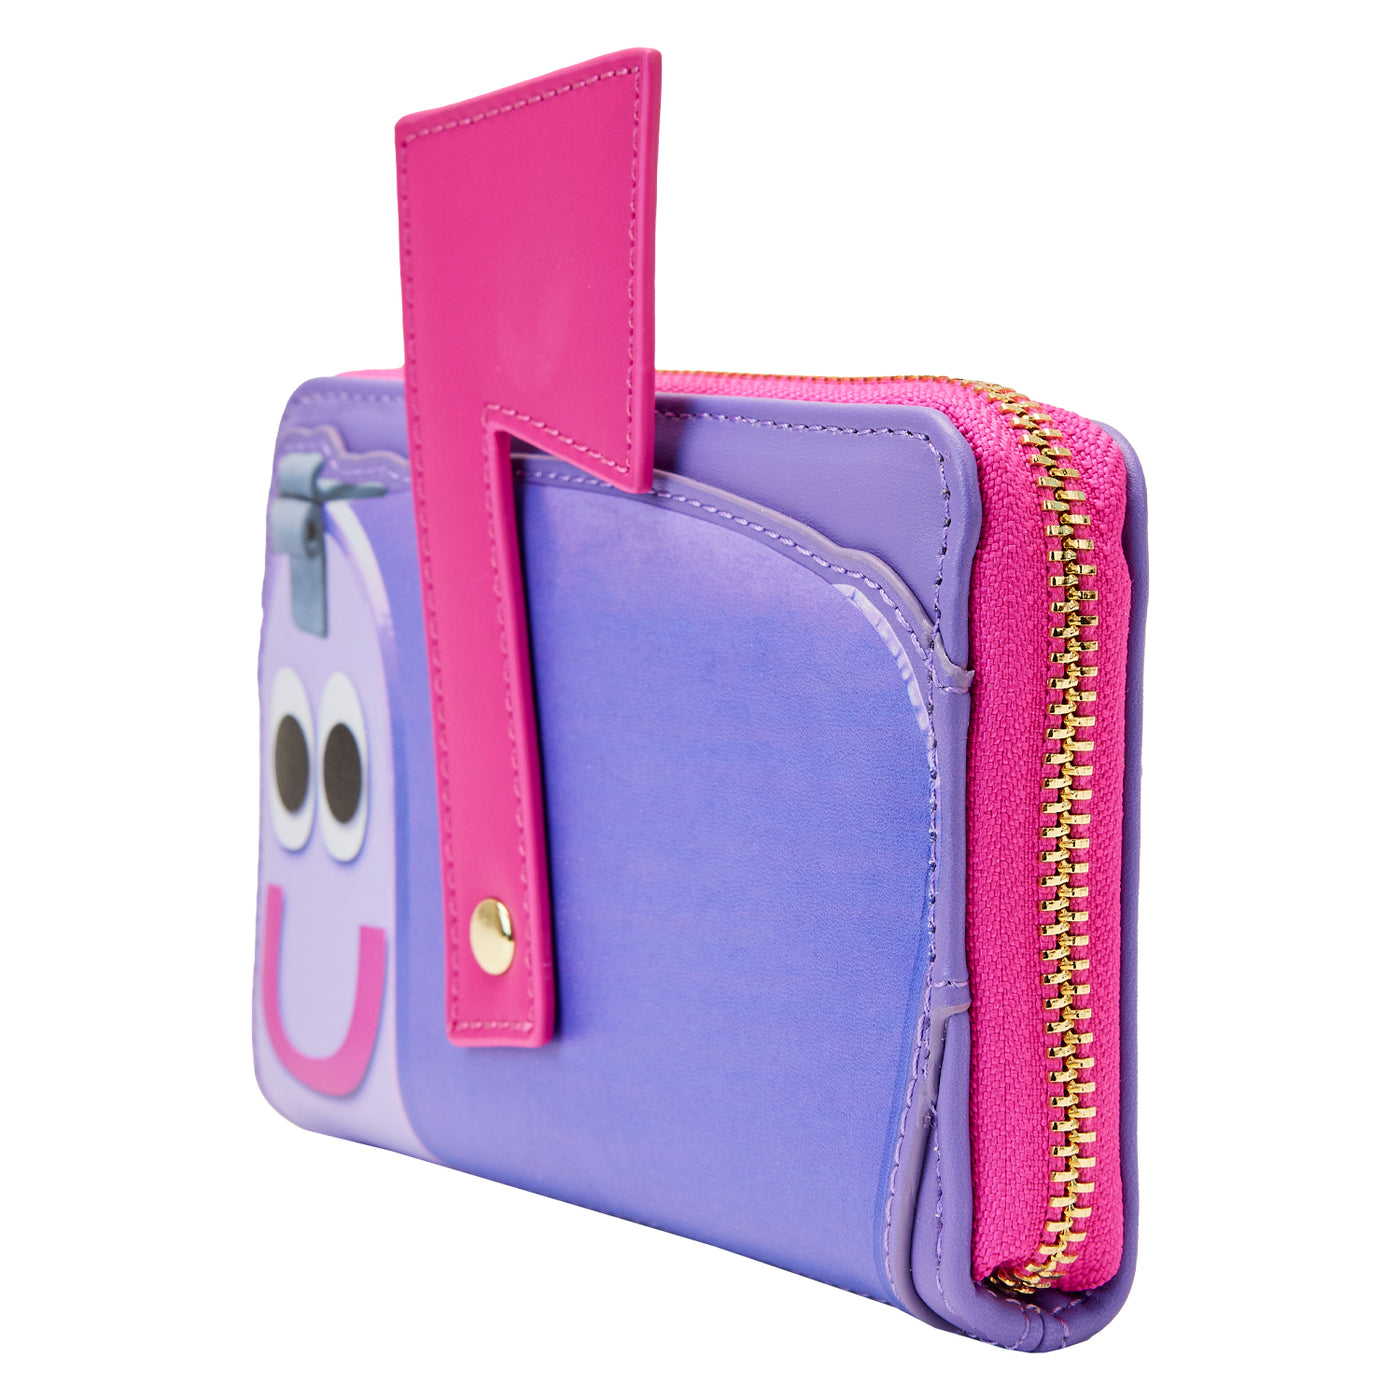 Nickelodeon Blues Clues Mail Time Wallet